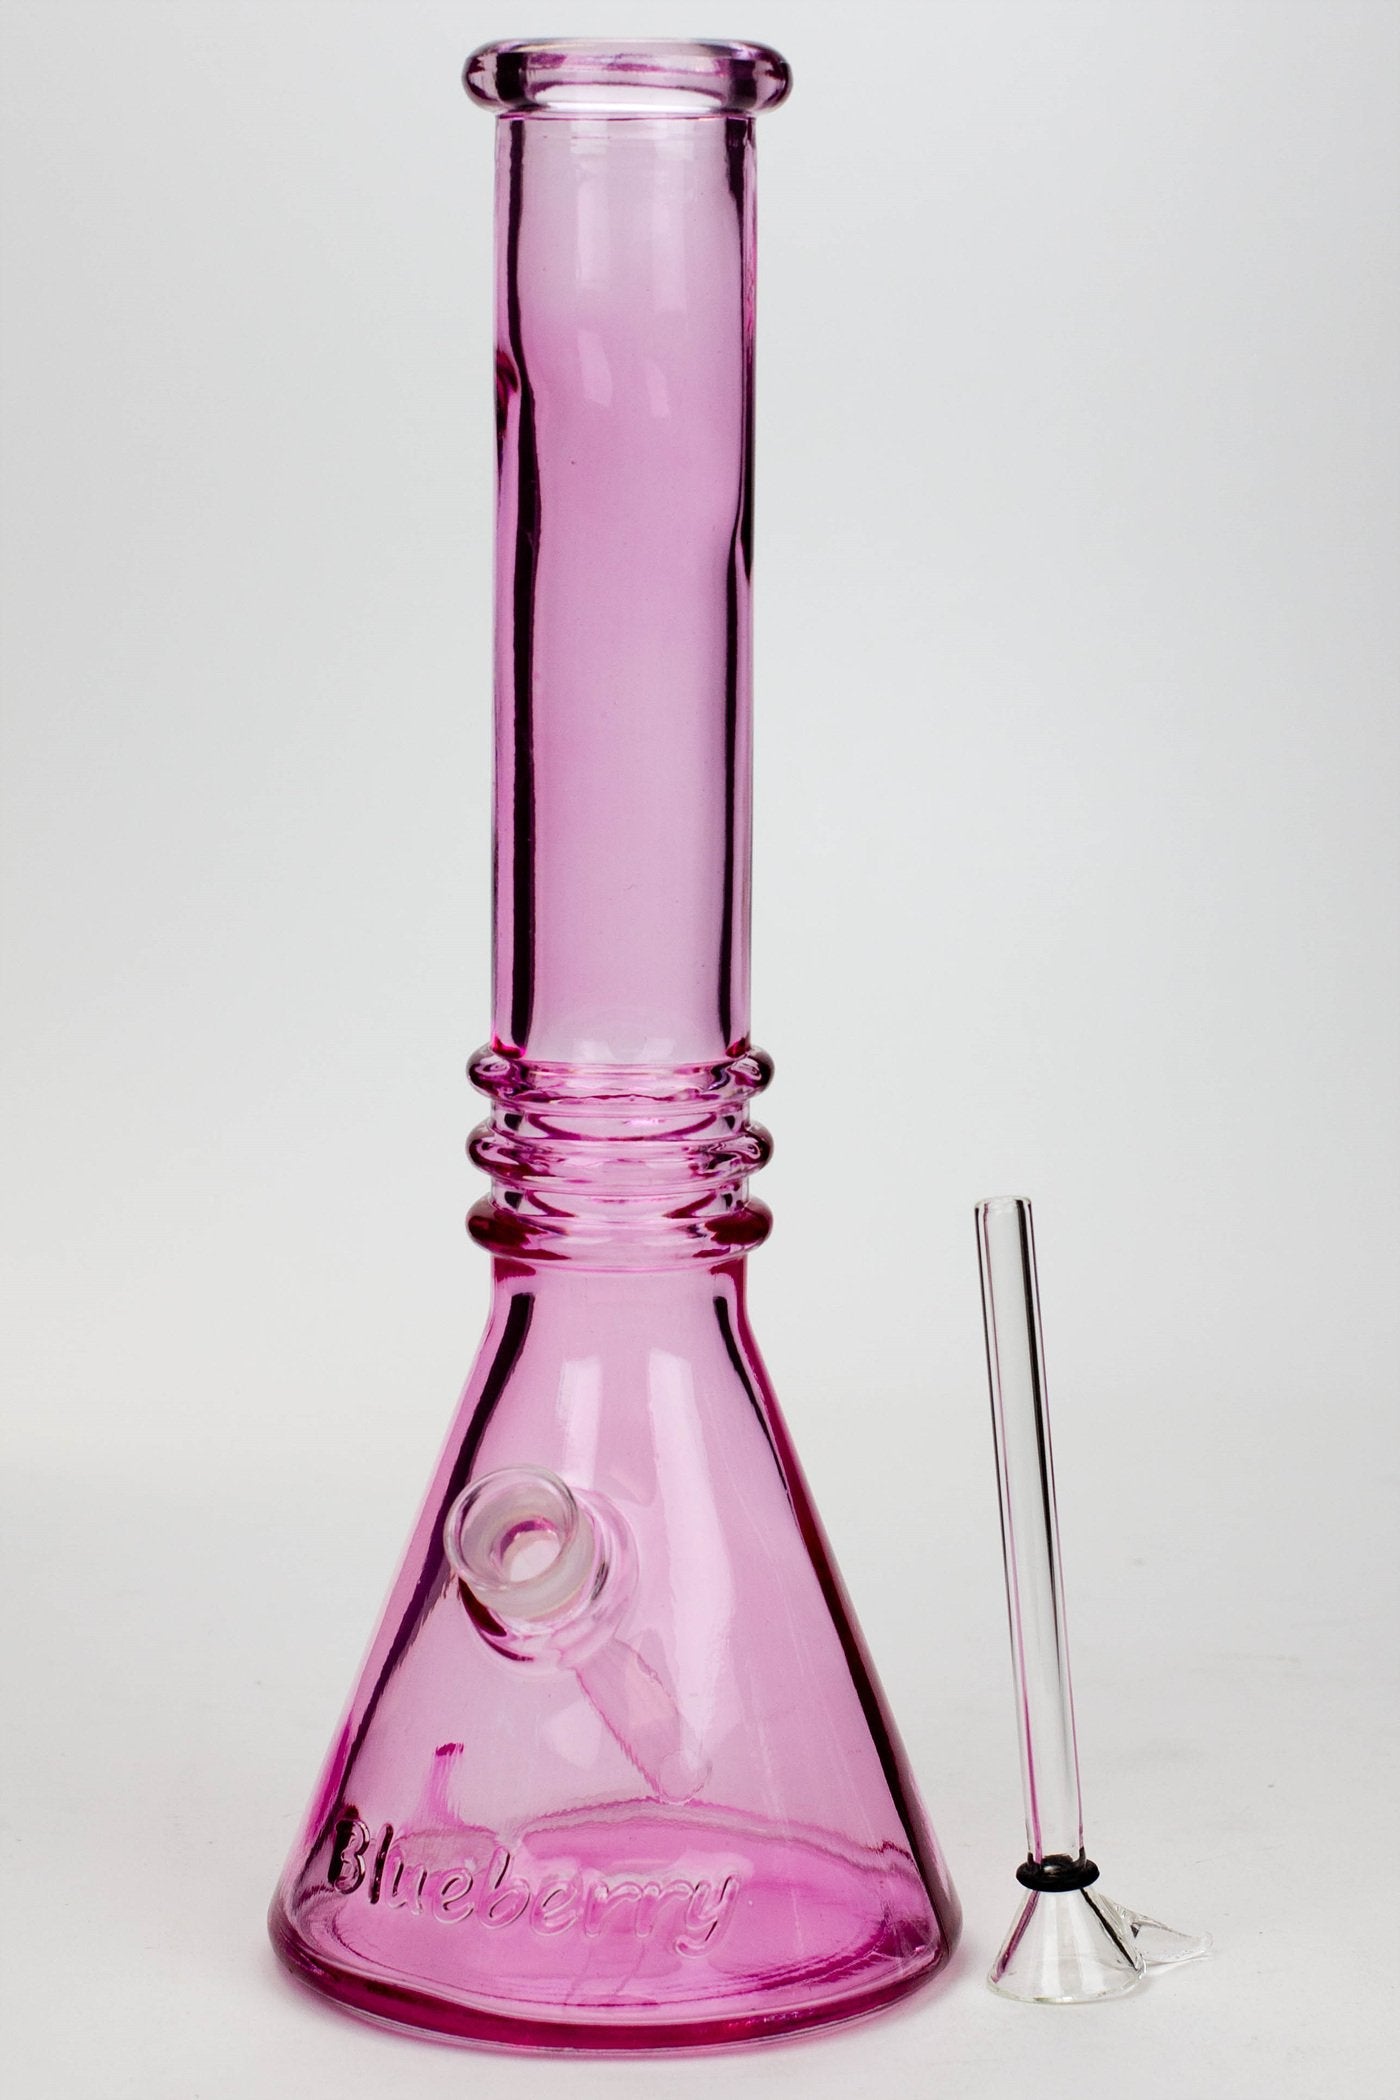 12" colored soft glass water bong Flower Power Packages 